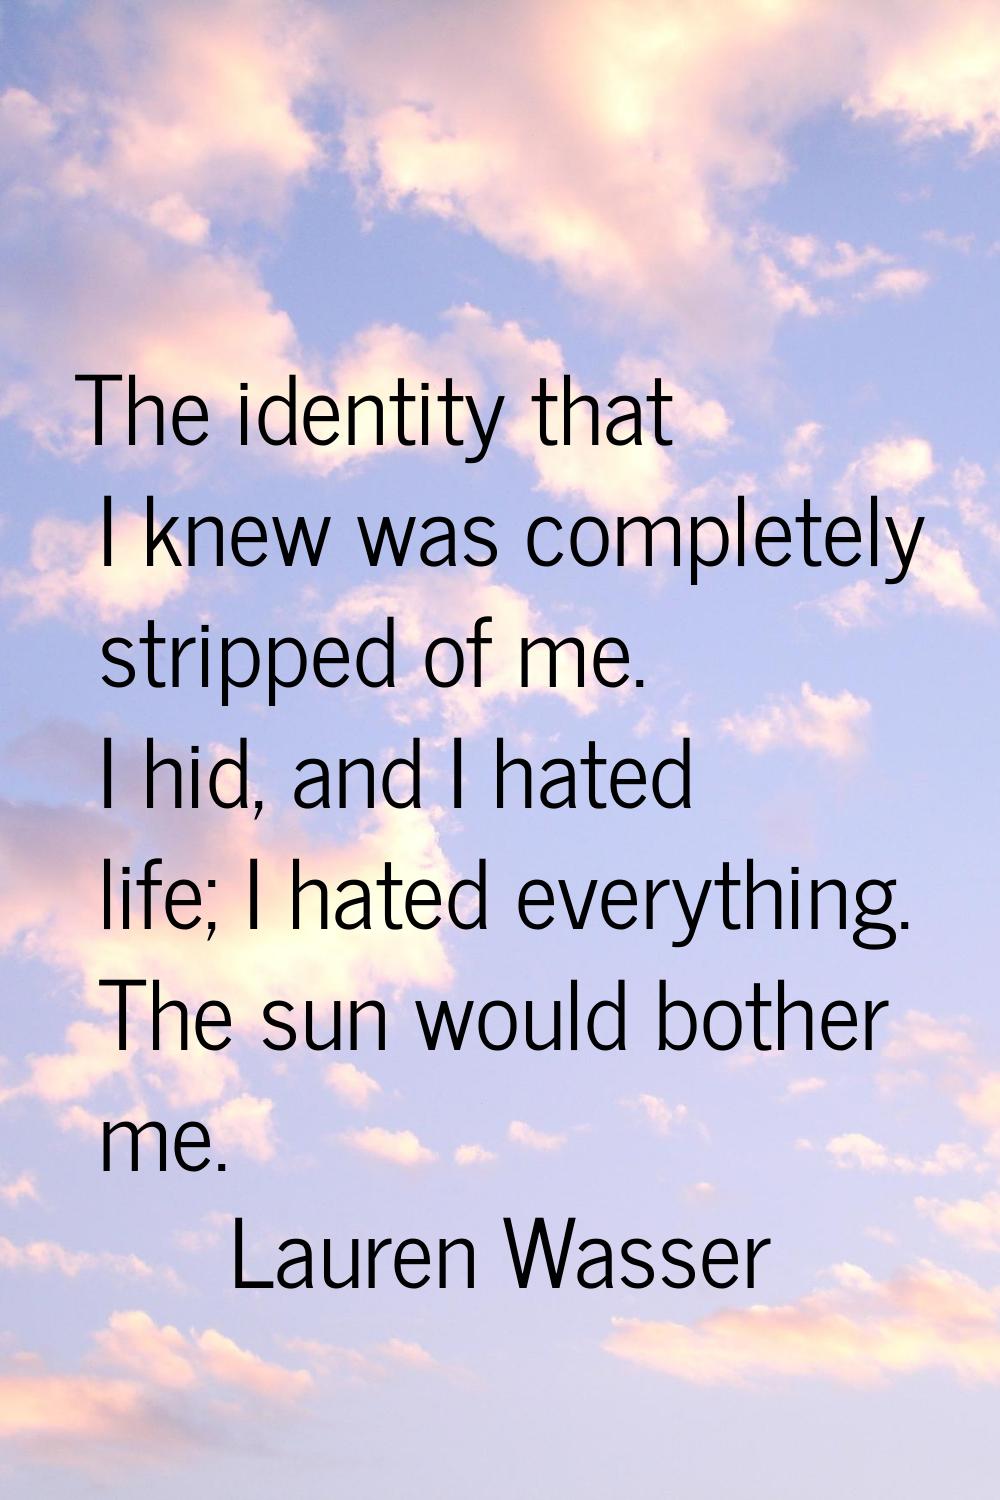 The identity that I knew was completely stripped of me. I hid, and I hated life; I hated everything